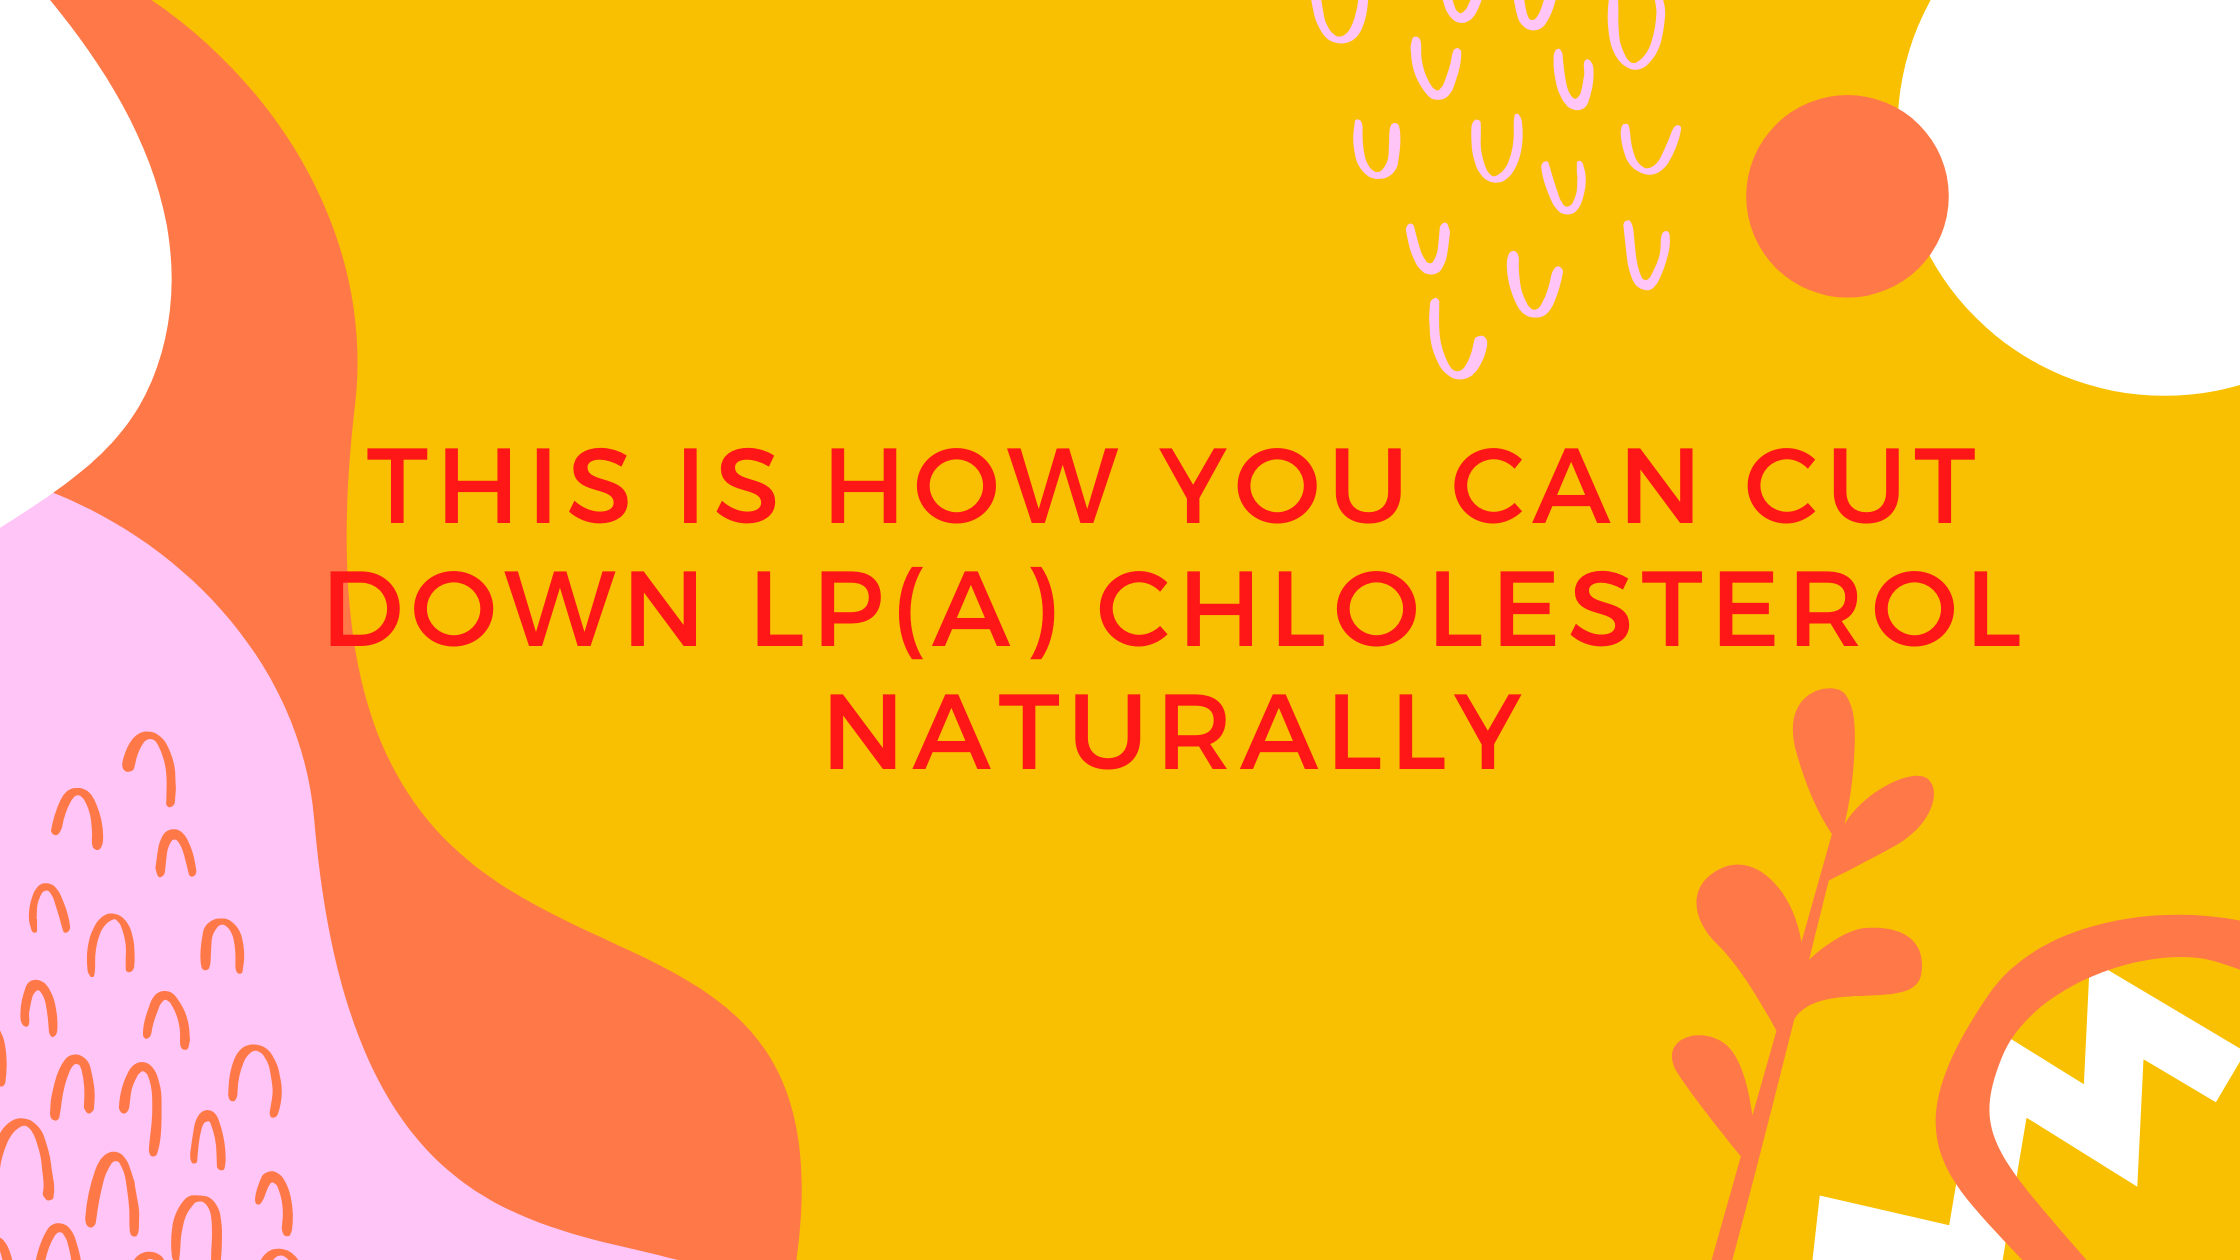 This is How You Cut Down lp(a) cholesterol naturally